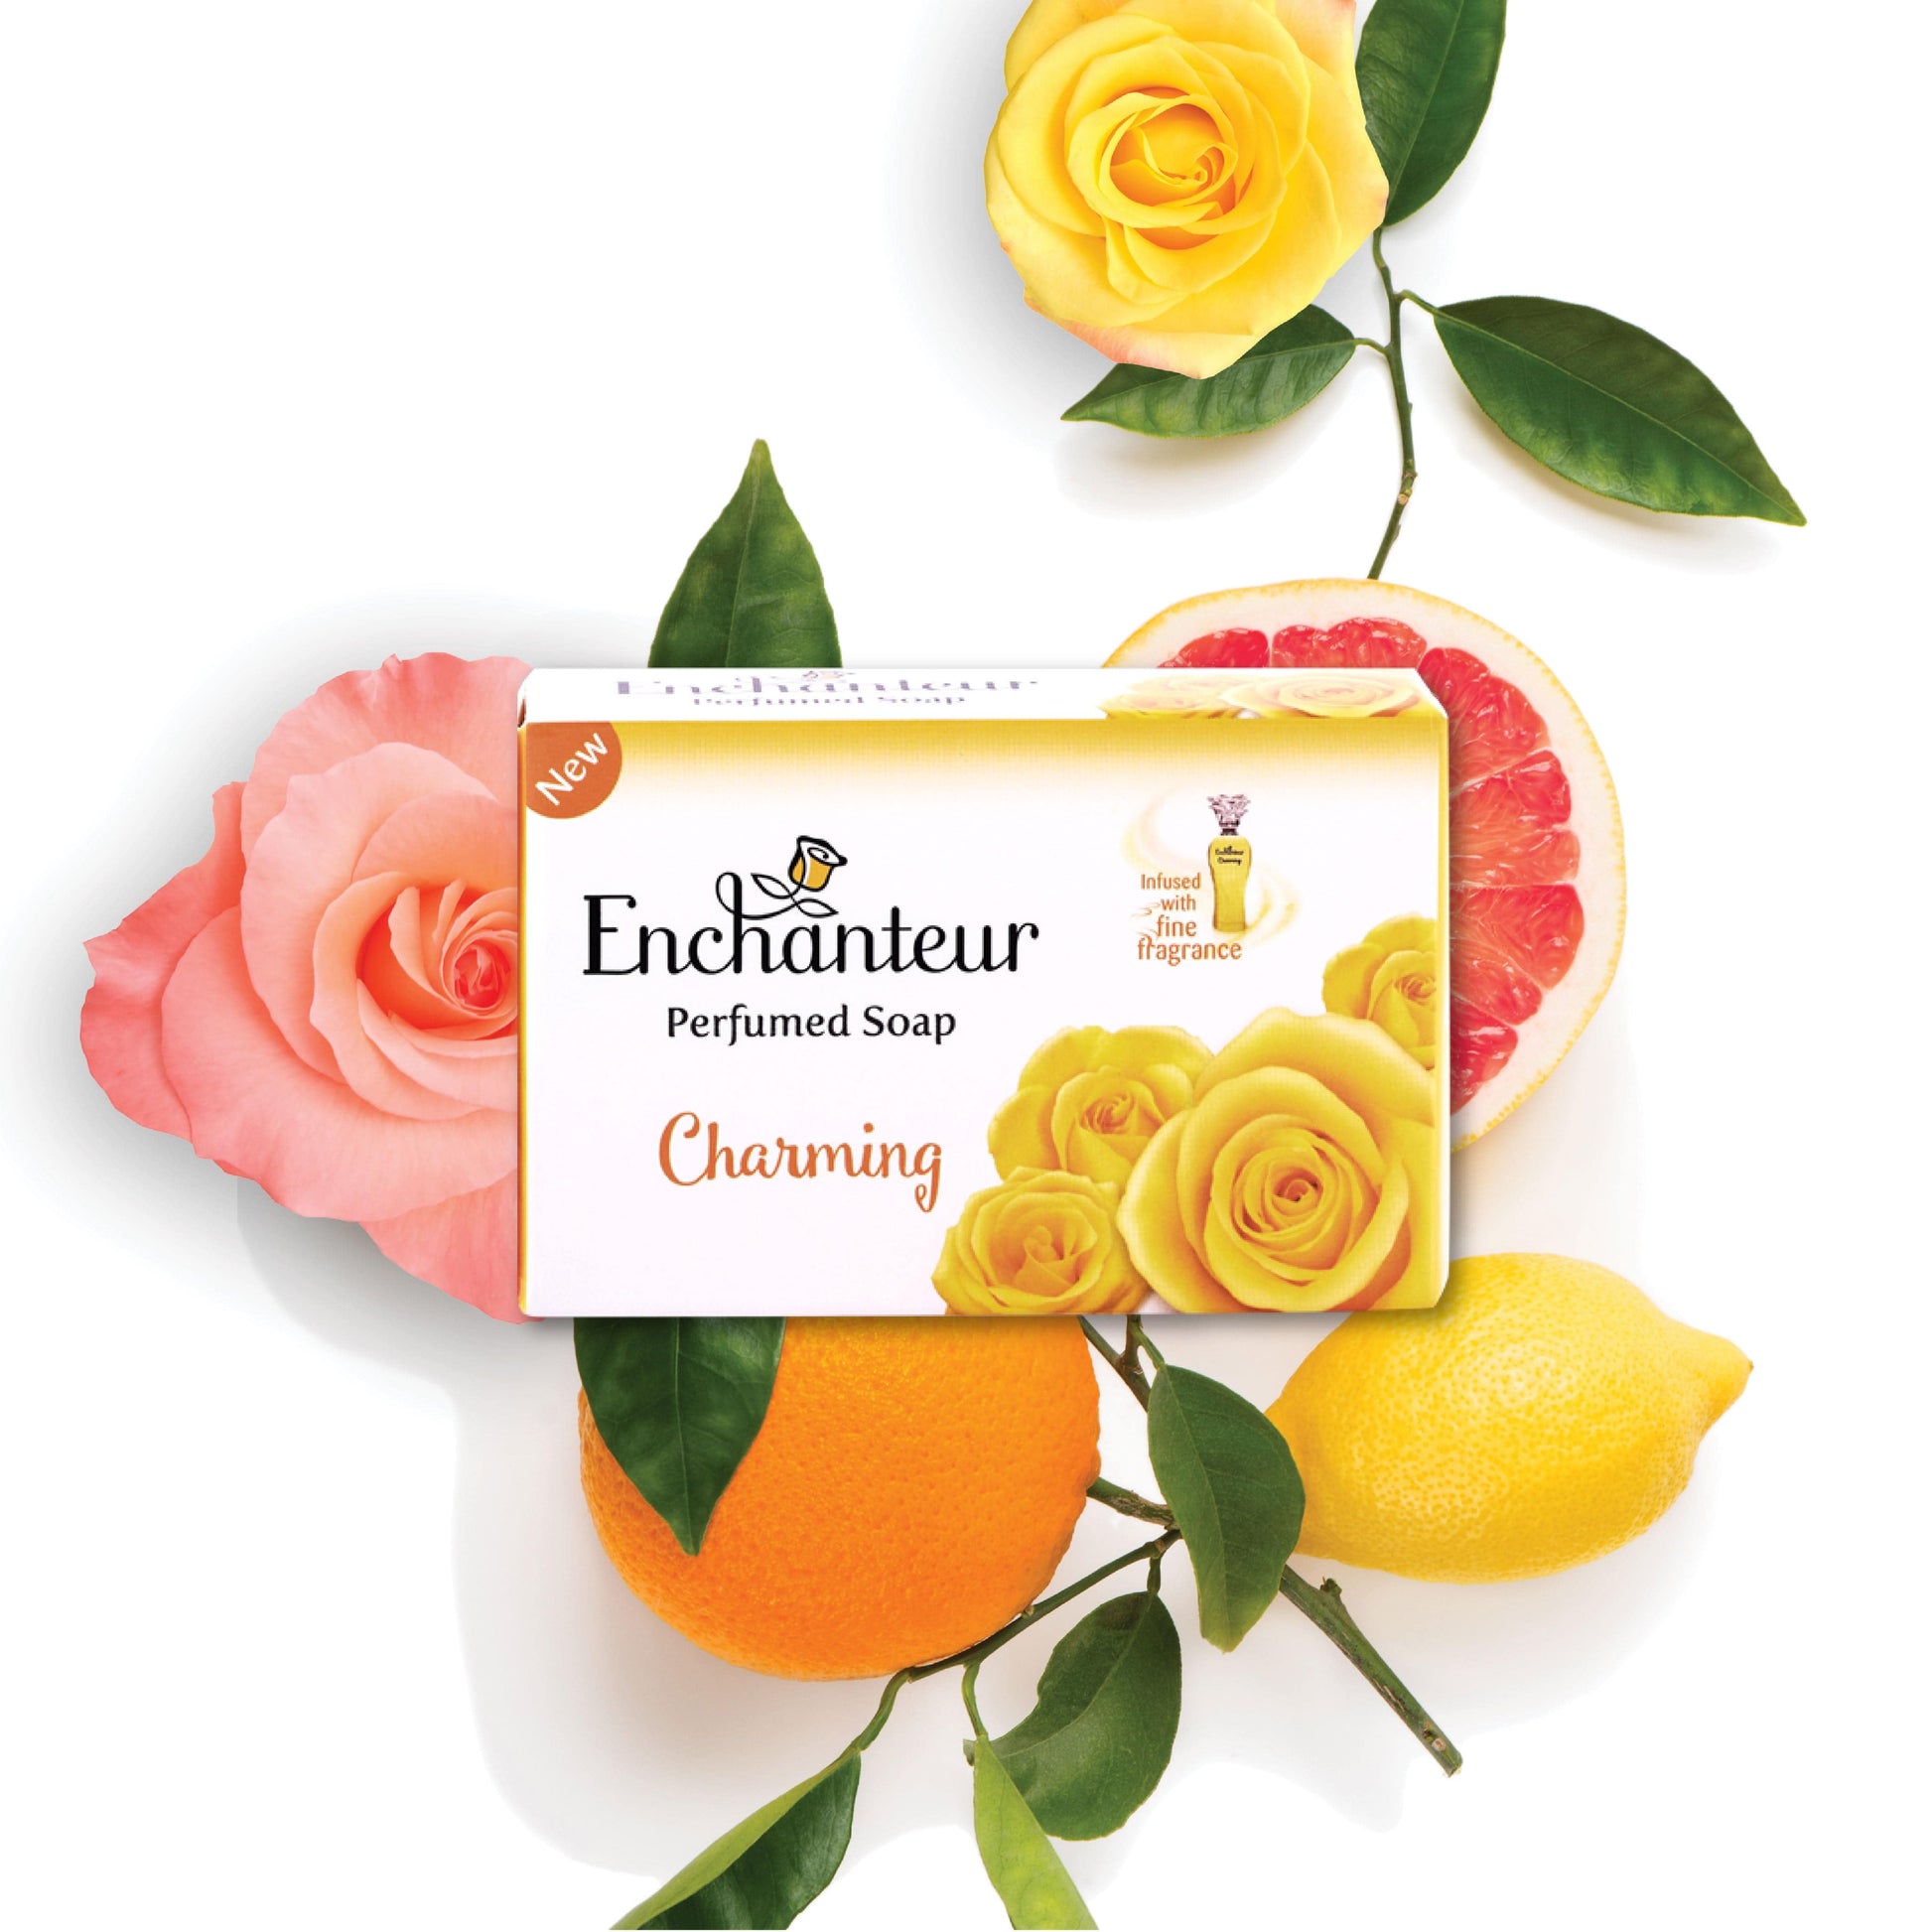 Enchanteur Perfumed Charming Soap, blended with the luxurious notes of Roses